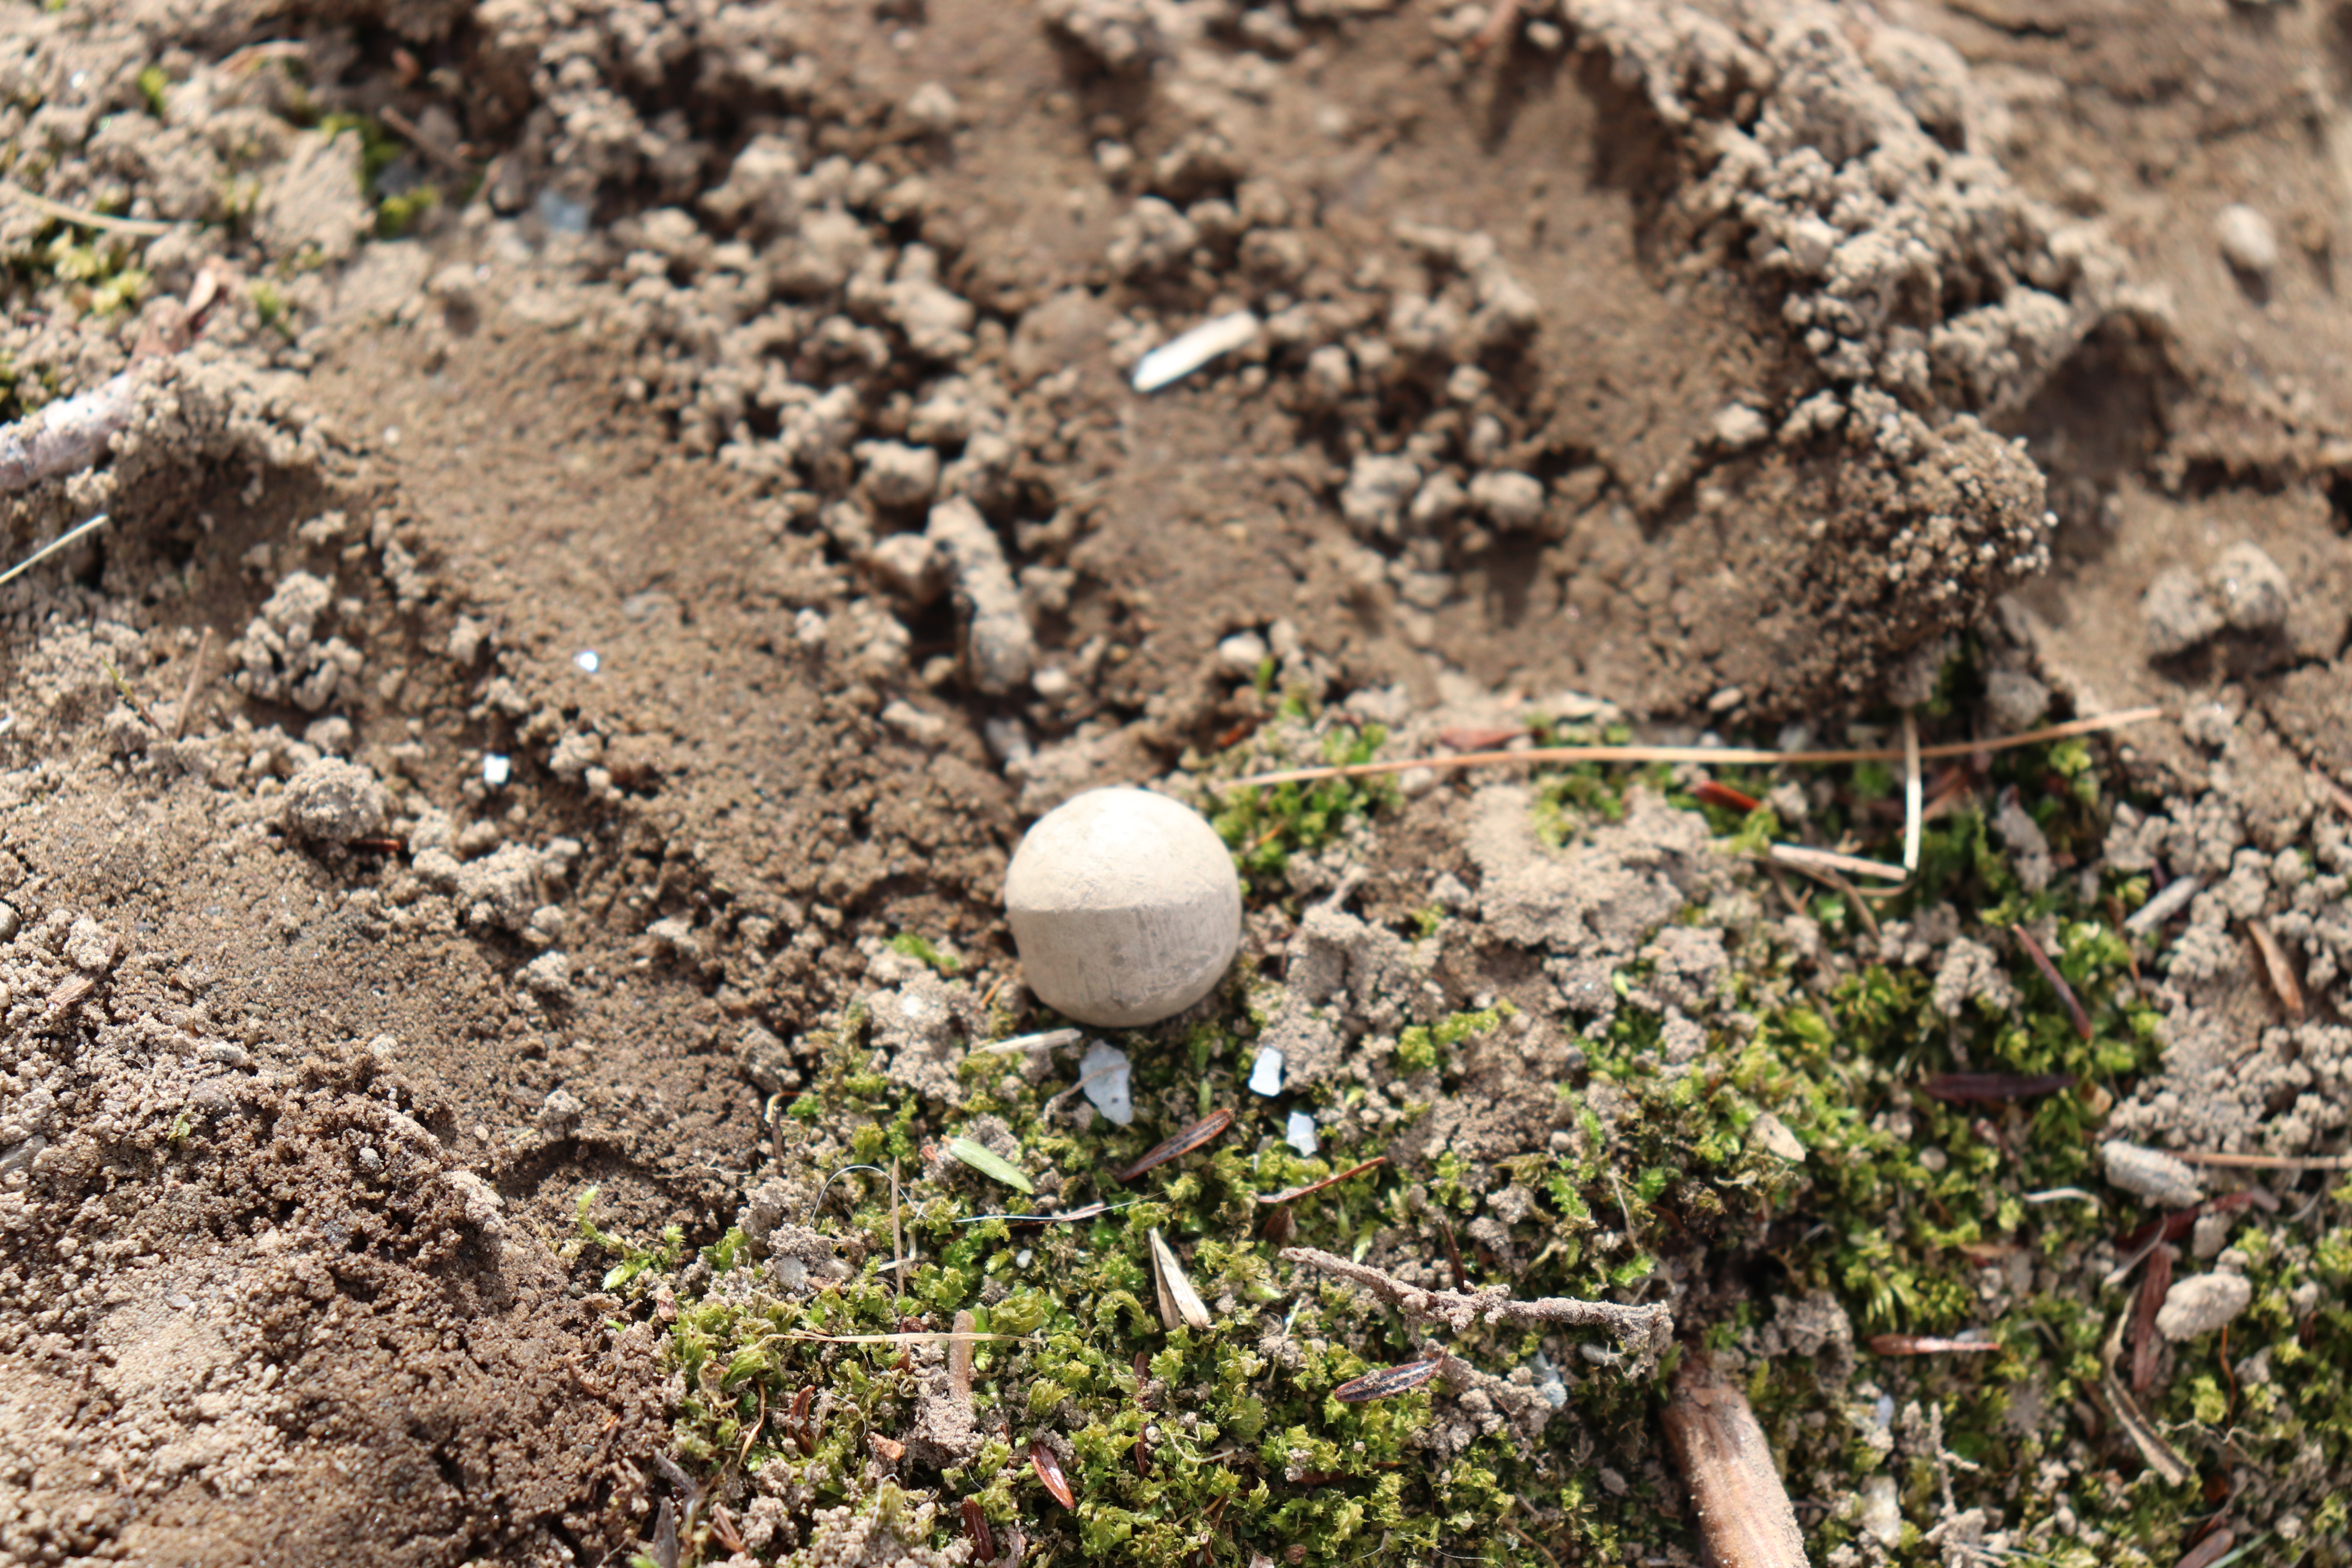 Image of a musket ball in the dirt